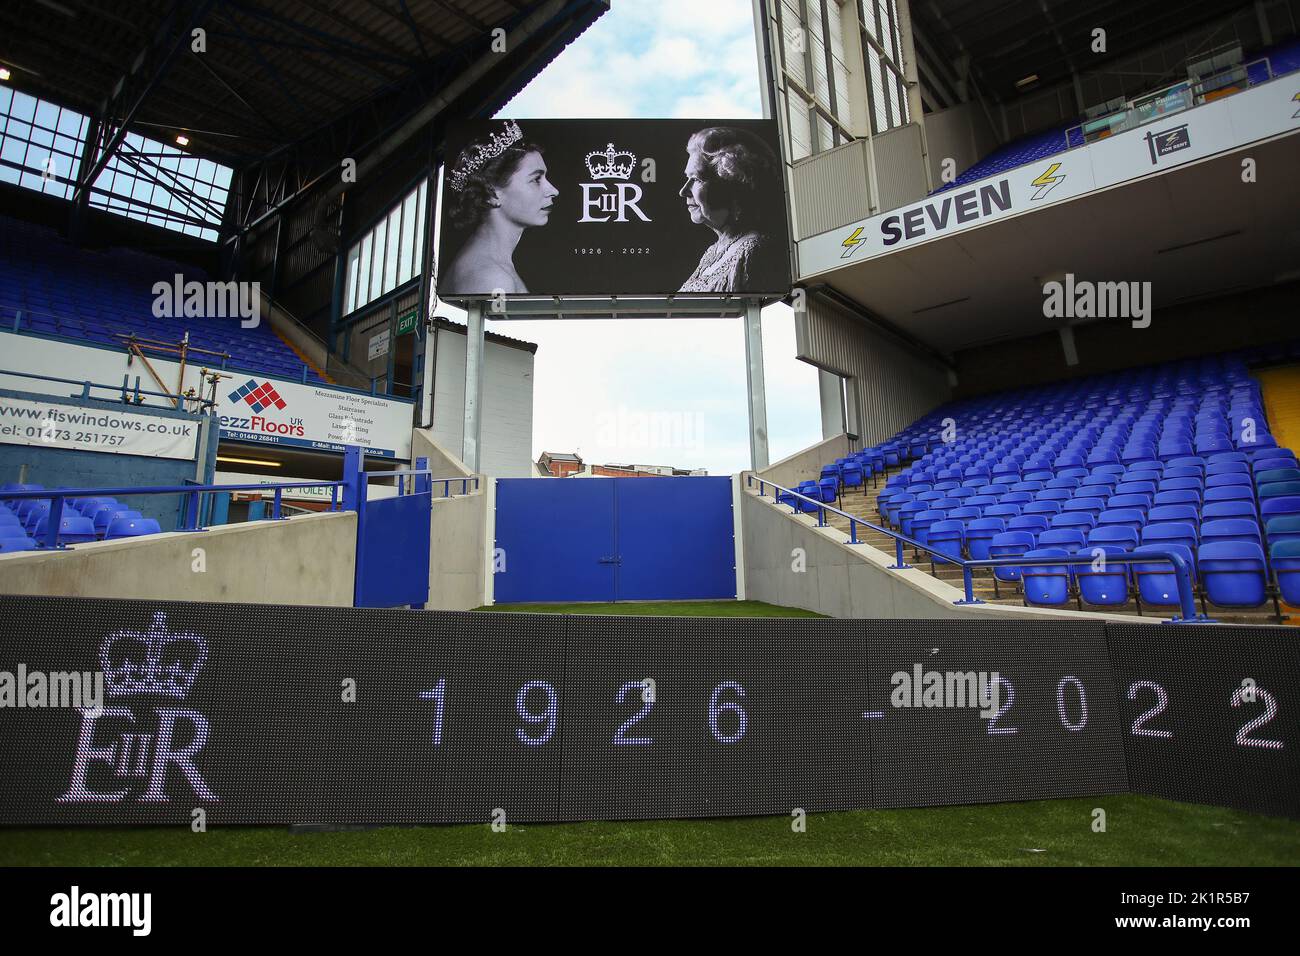 A tribute to Queen Elizabeth II is seen ahead of the match - Ipswich Town v Bristol Rovers, Sky Bet League One, Portman Road, Ipswich, UK - 13th September 2022  Editorial Use Only - DataCo restrictions apply Stock Photo